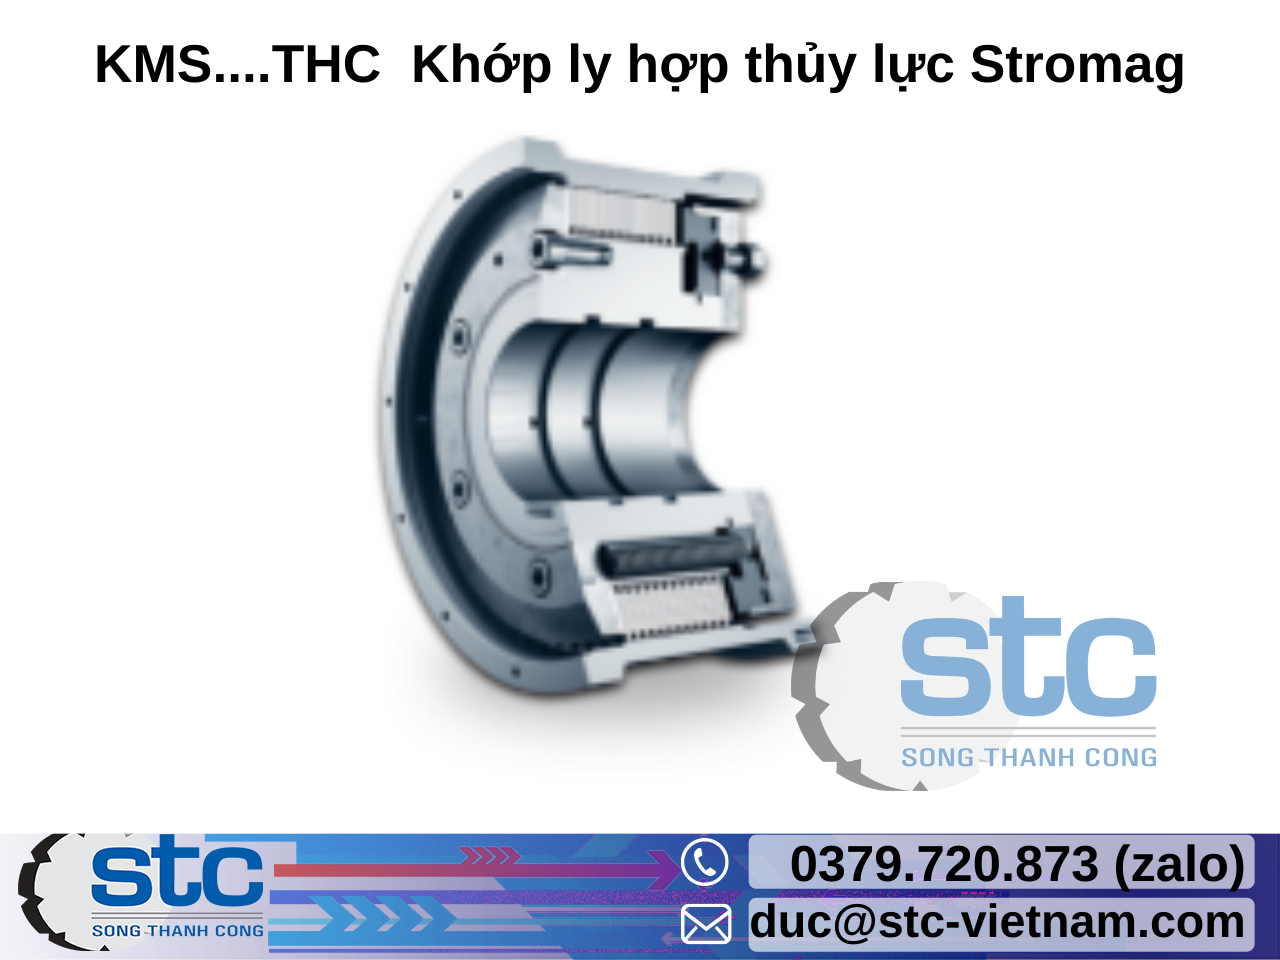 kms-thc-khop-ly-hop-thuy-luc-stromag.png